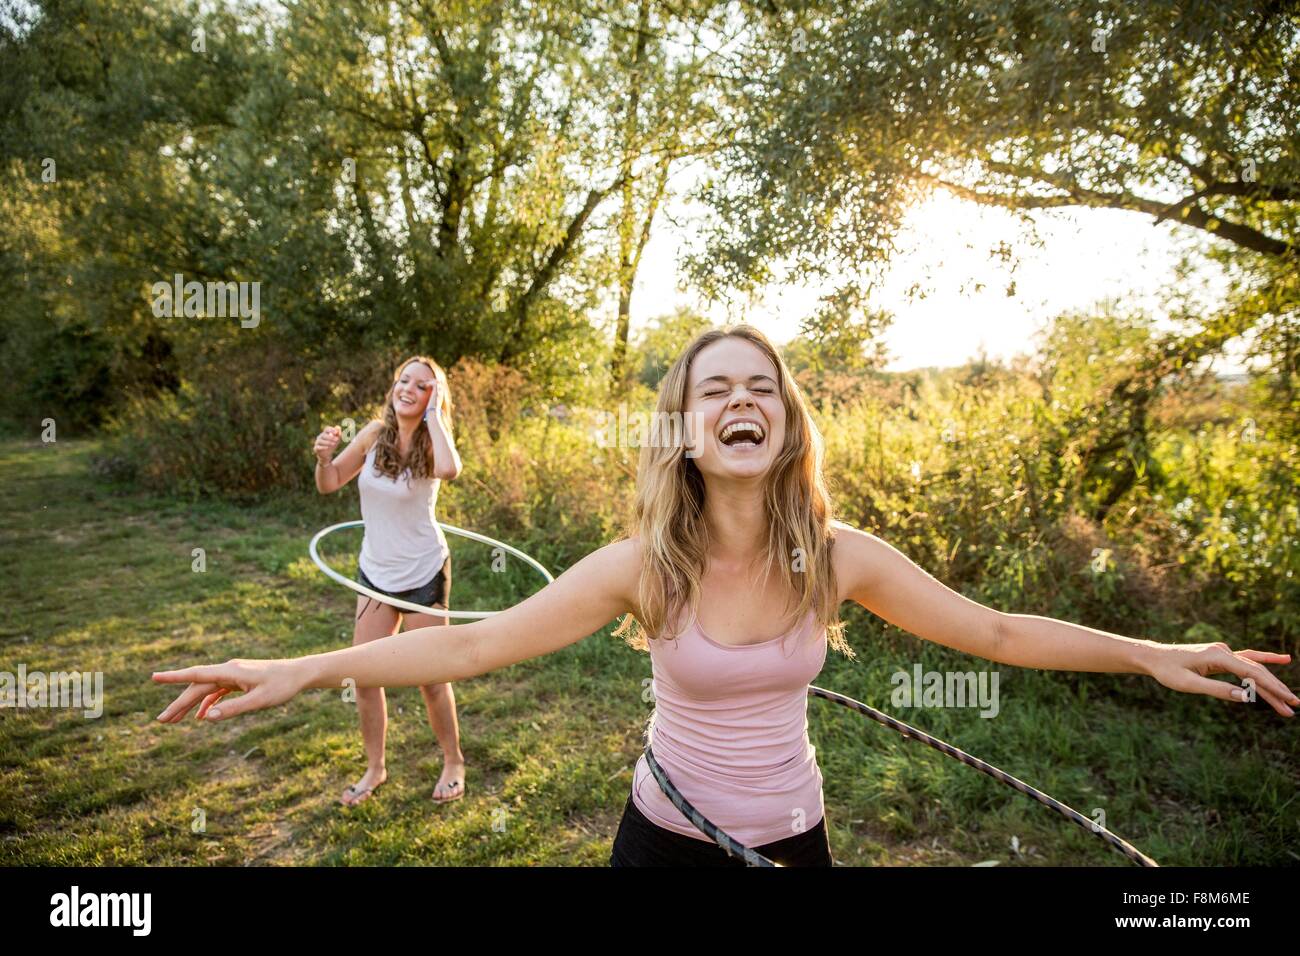 Two young girls in rural environment, fooling around, using hula hoops, Stock Photo